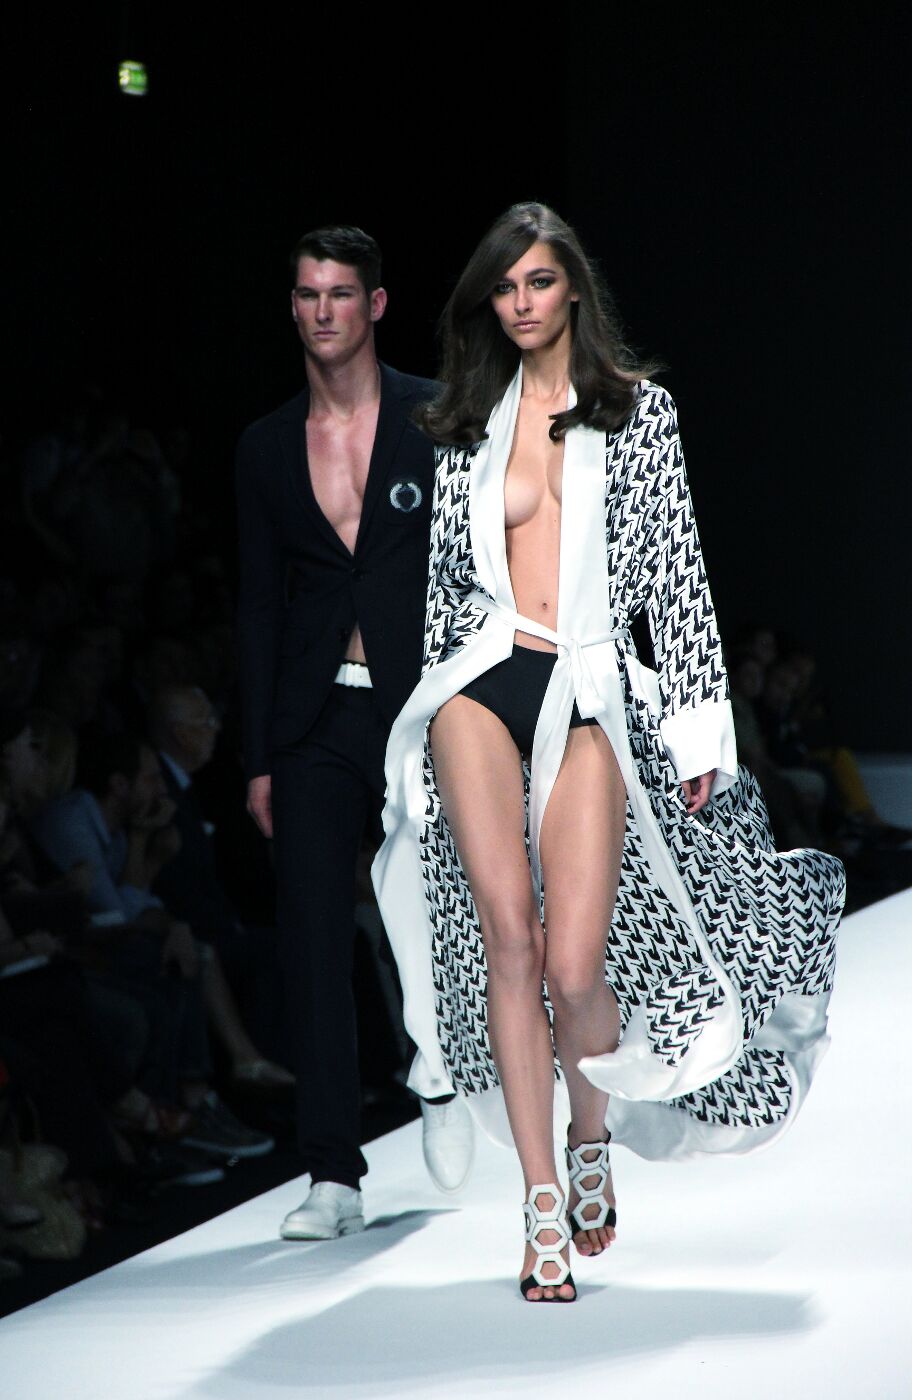 dirk-bikkembergs-sport-couture-ss-spring-summer-2012-milano-fashion-week-dirk-bikkembergs-sport-couture